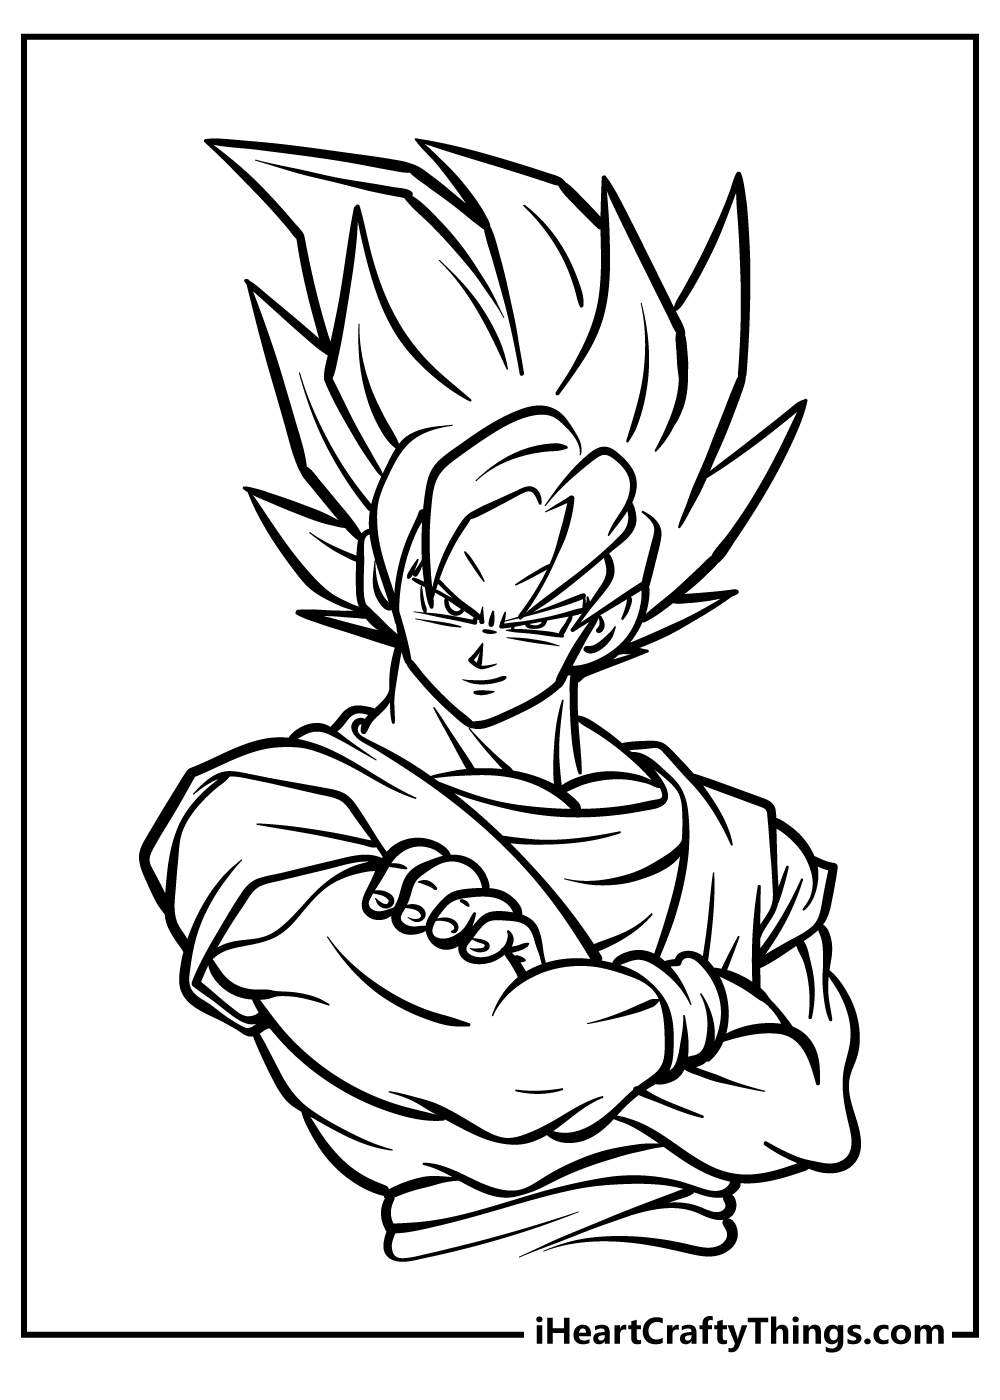 Goku Coloring Pages for kids free download